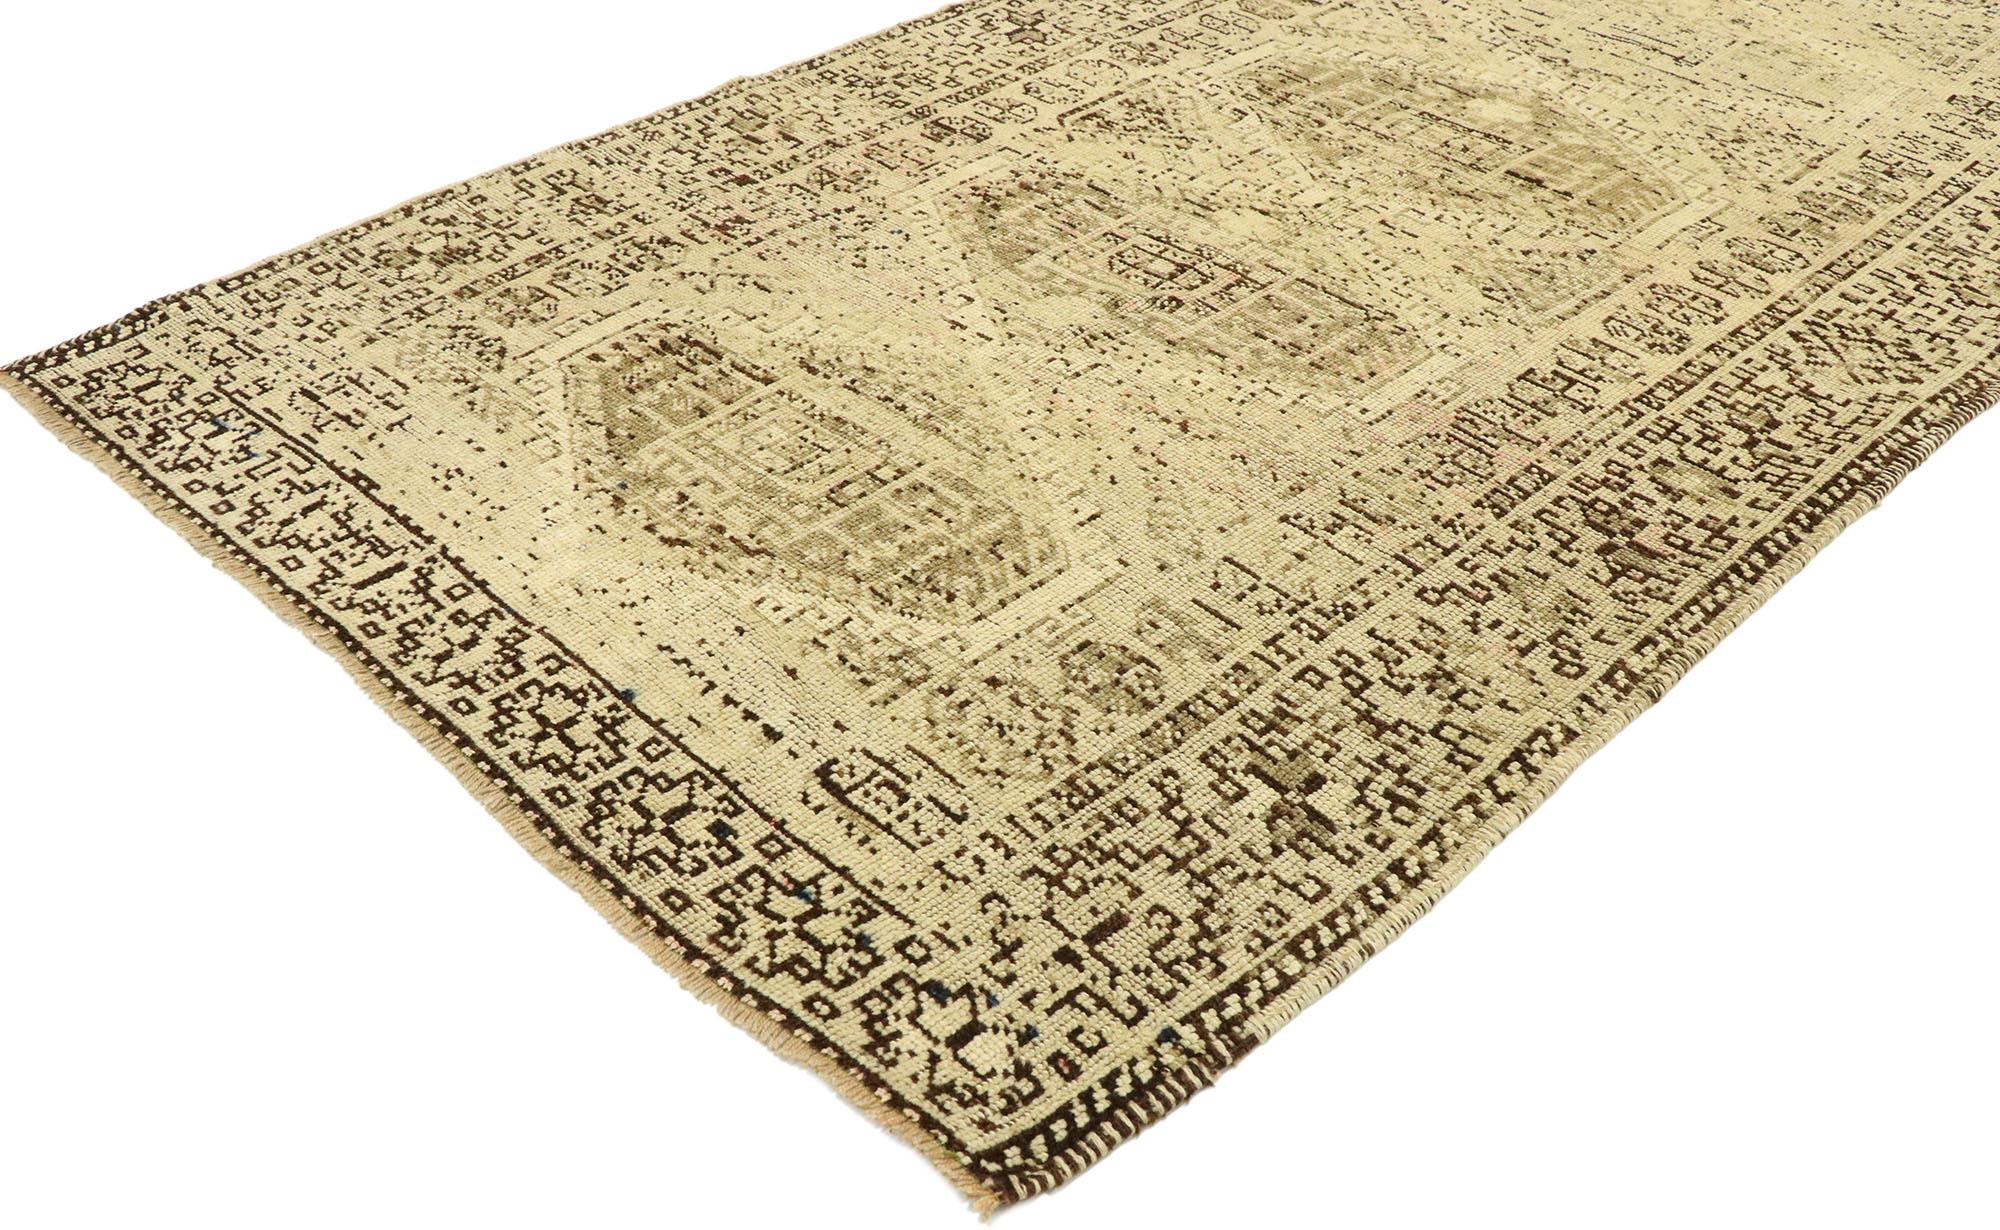 53048, vintage Persian Shiraz rug with modern shaker style. Warm and inviting with an expressive design aesthetic in a neutral colorway, this hand knotted wool vintage Persian Shiraz rug beautifully embodies a modern shaker style. The abrashed and